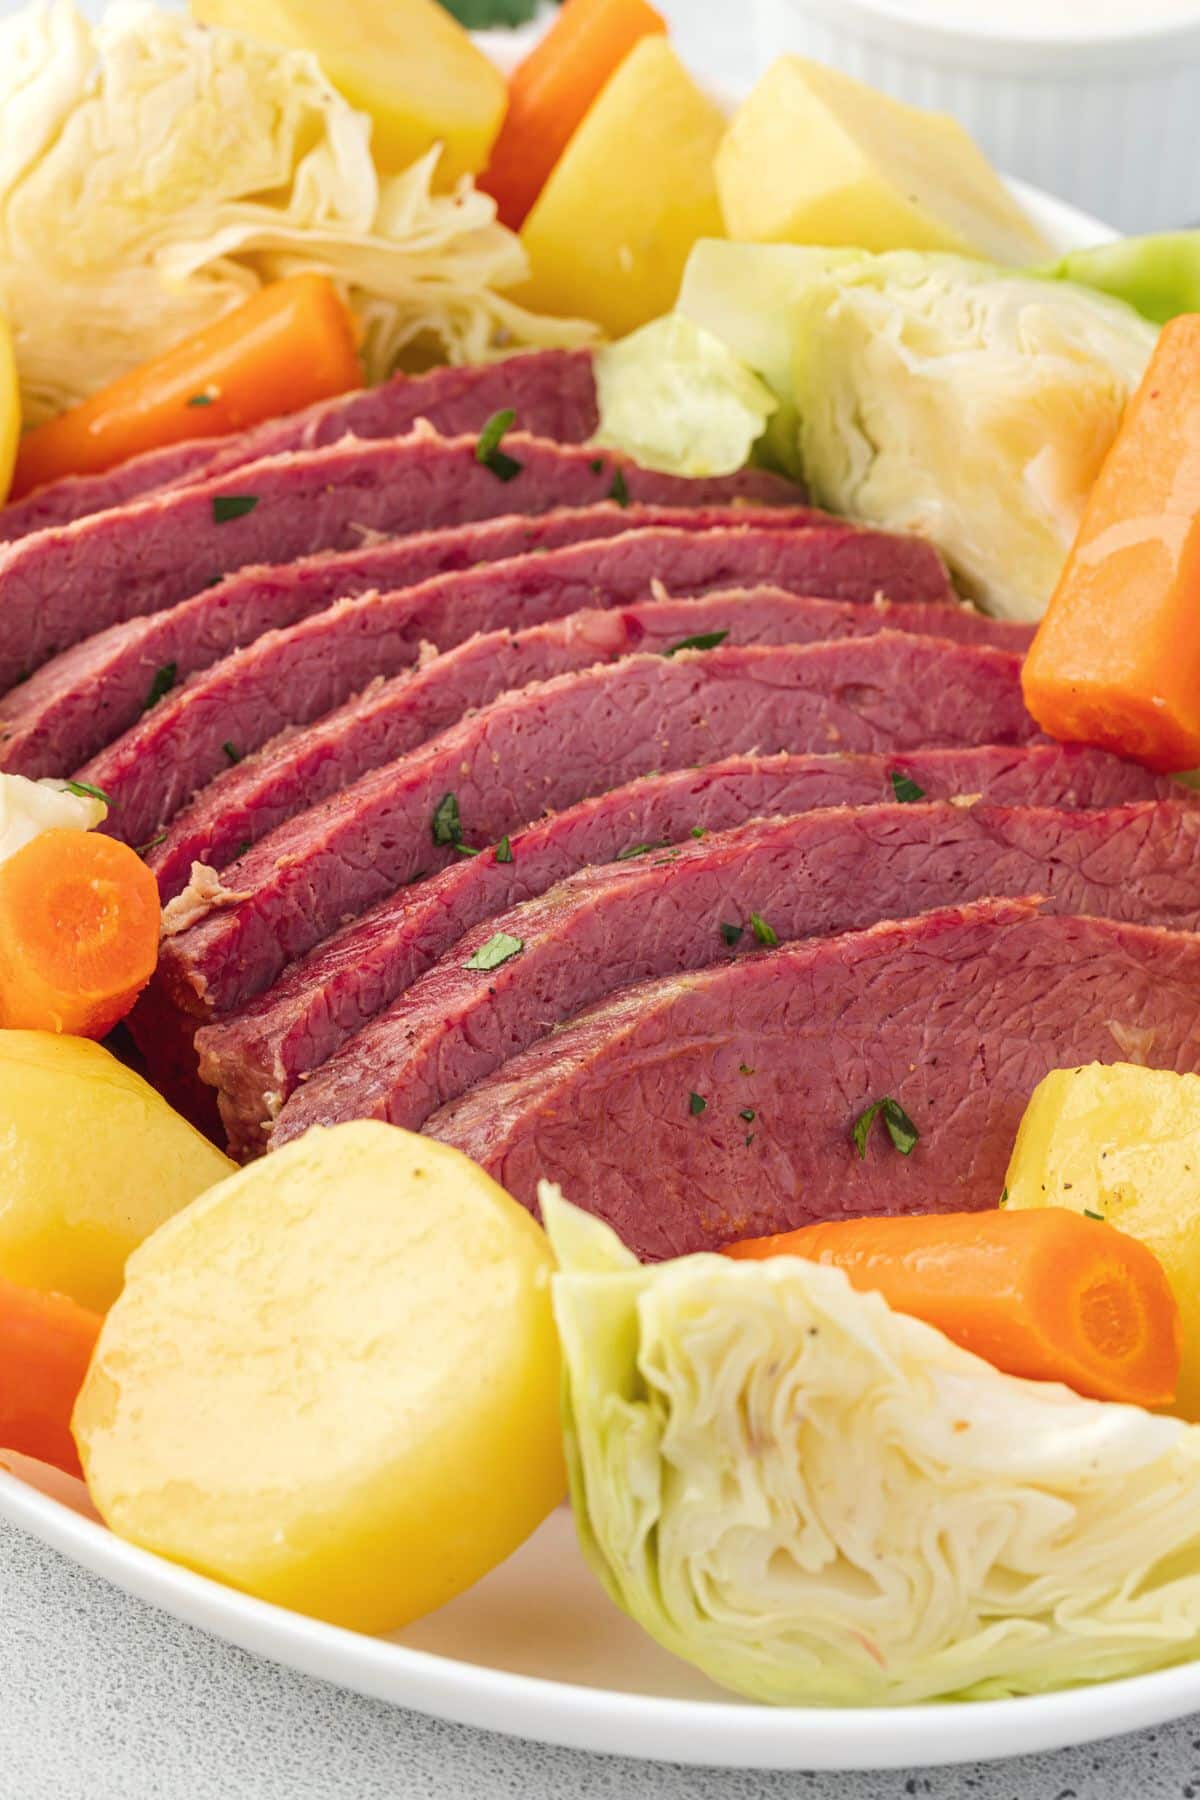 Corned beef surrounded by carrots, potatoes, and cabbage.